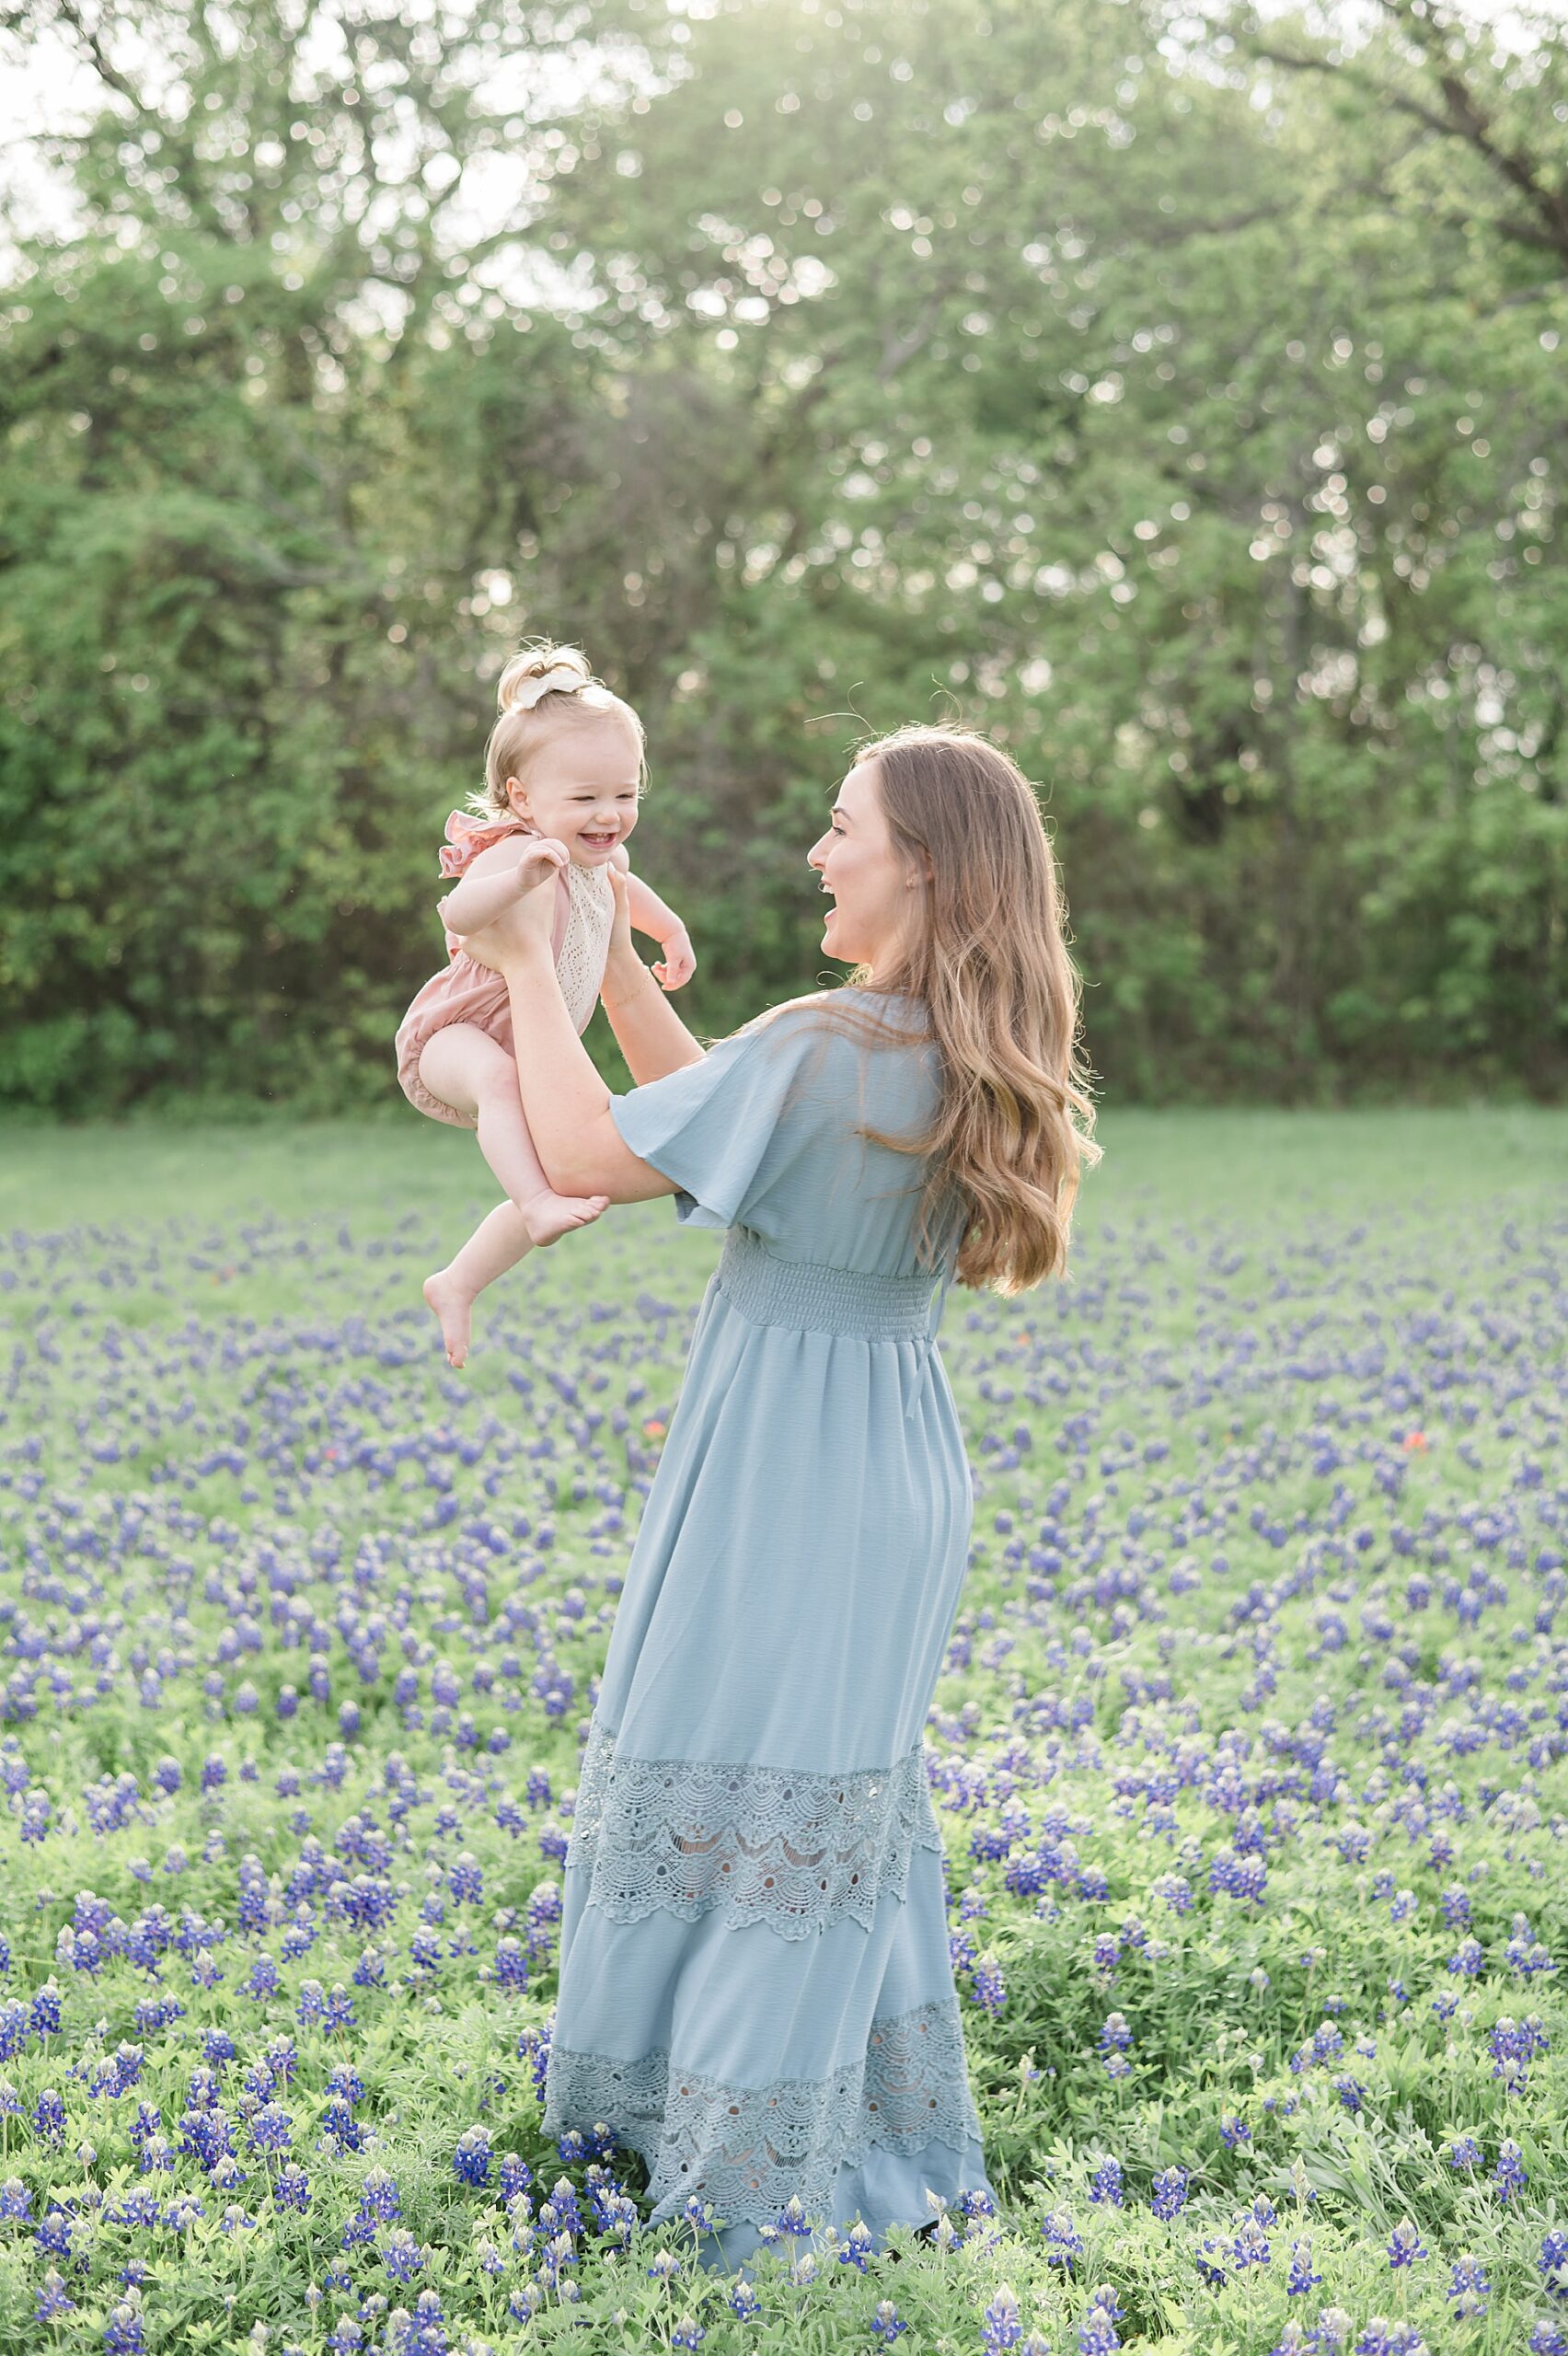 candid portraits of mom and daughter  photographed by Lindsey Dutton Photography, a Dallas family photographer